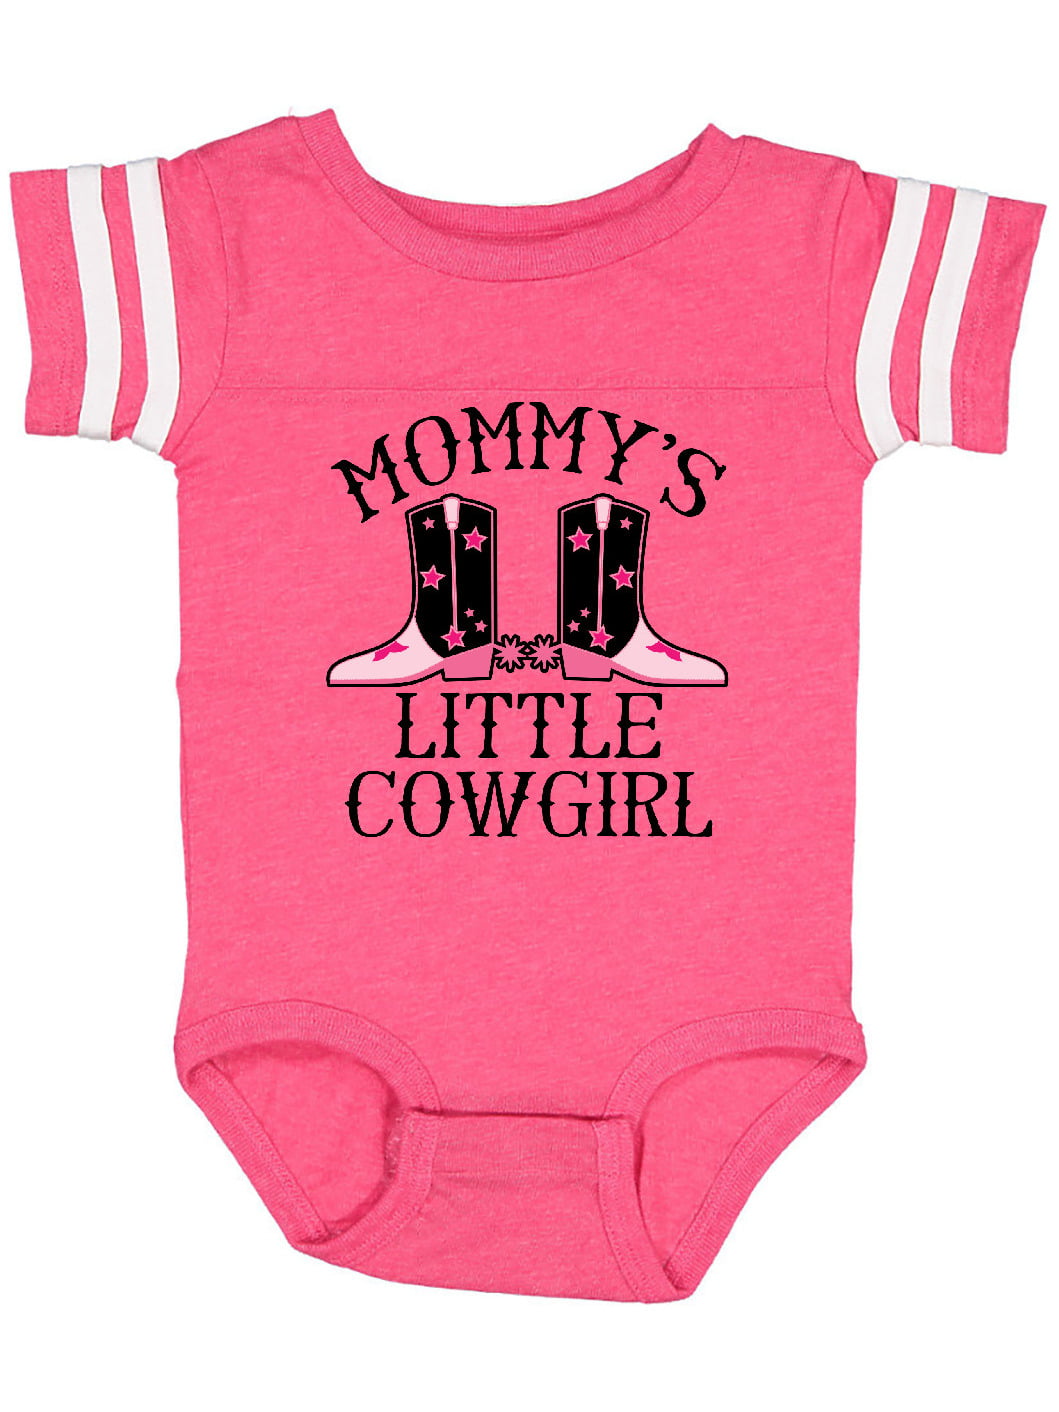 httpsipMommy Little Cowgirl Baby Clothes Infant Creeper238667203wmlspartnerwlpa&selectedSellerId3229